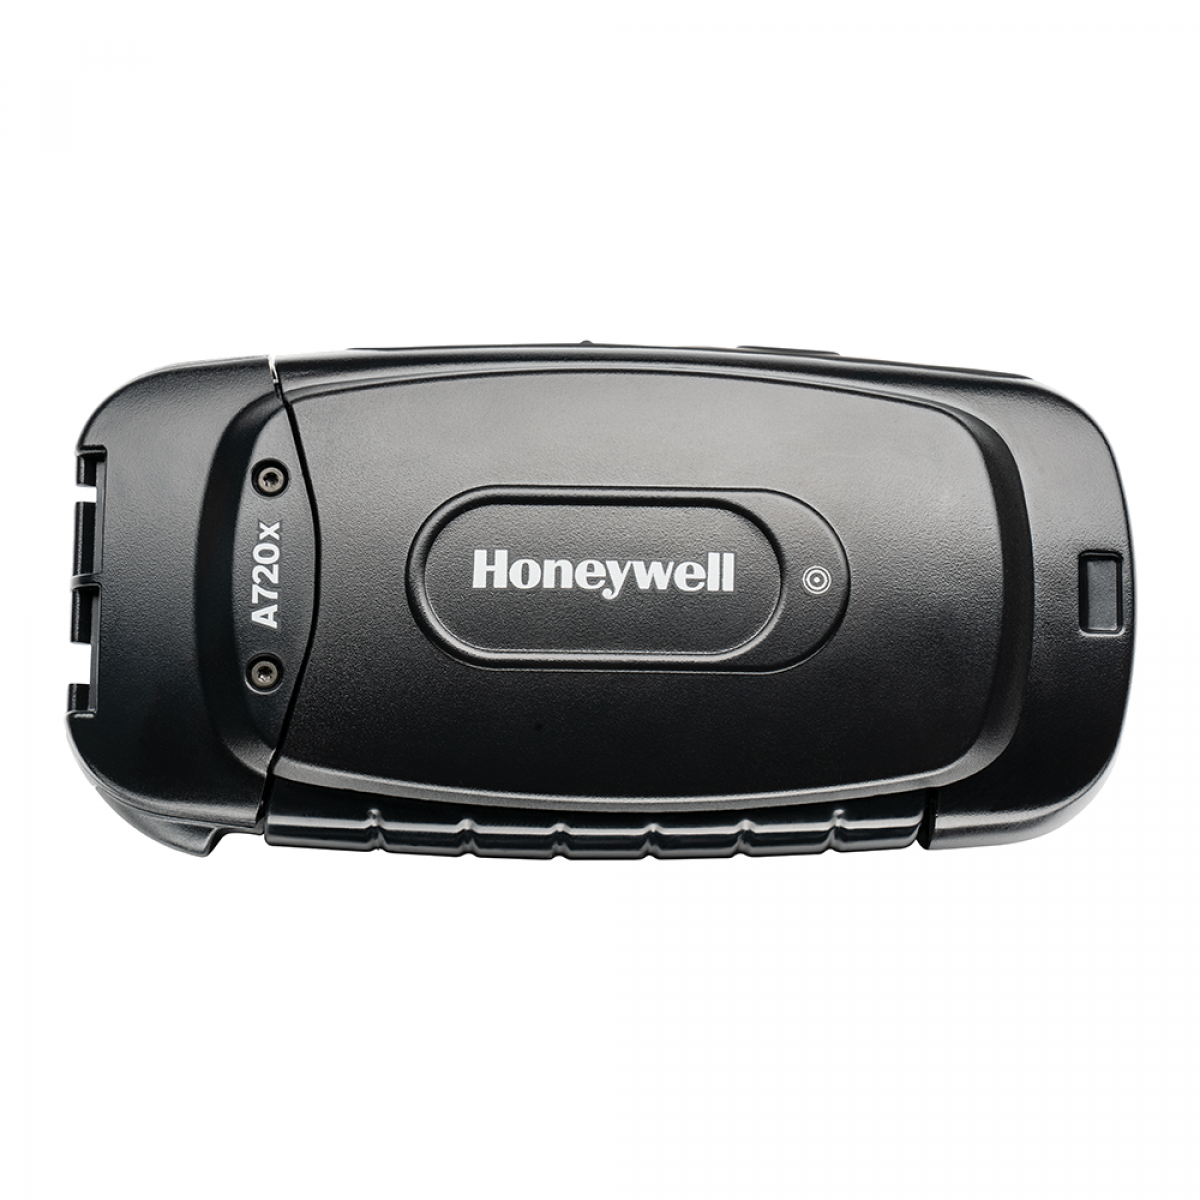 Voice enabled wearable computer - Honeywell A720X